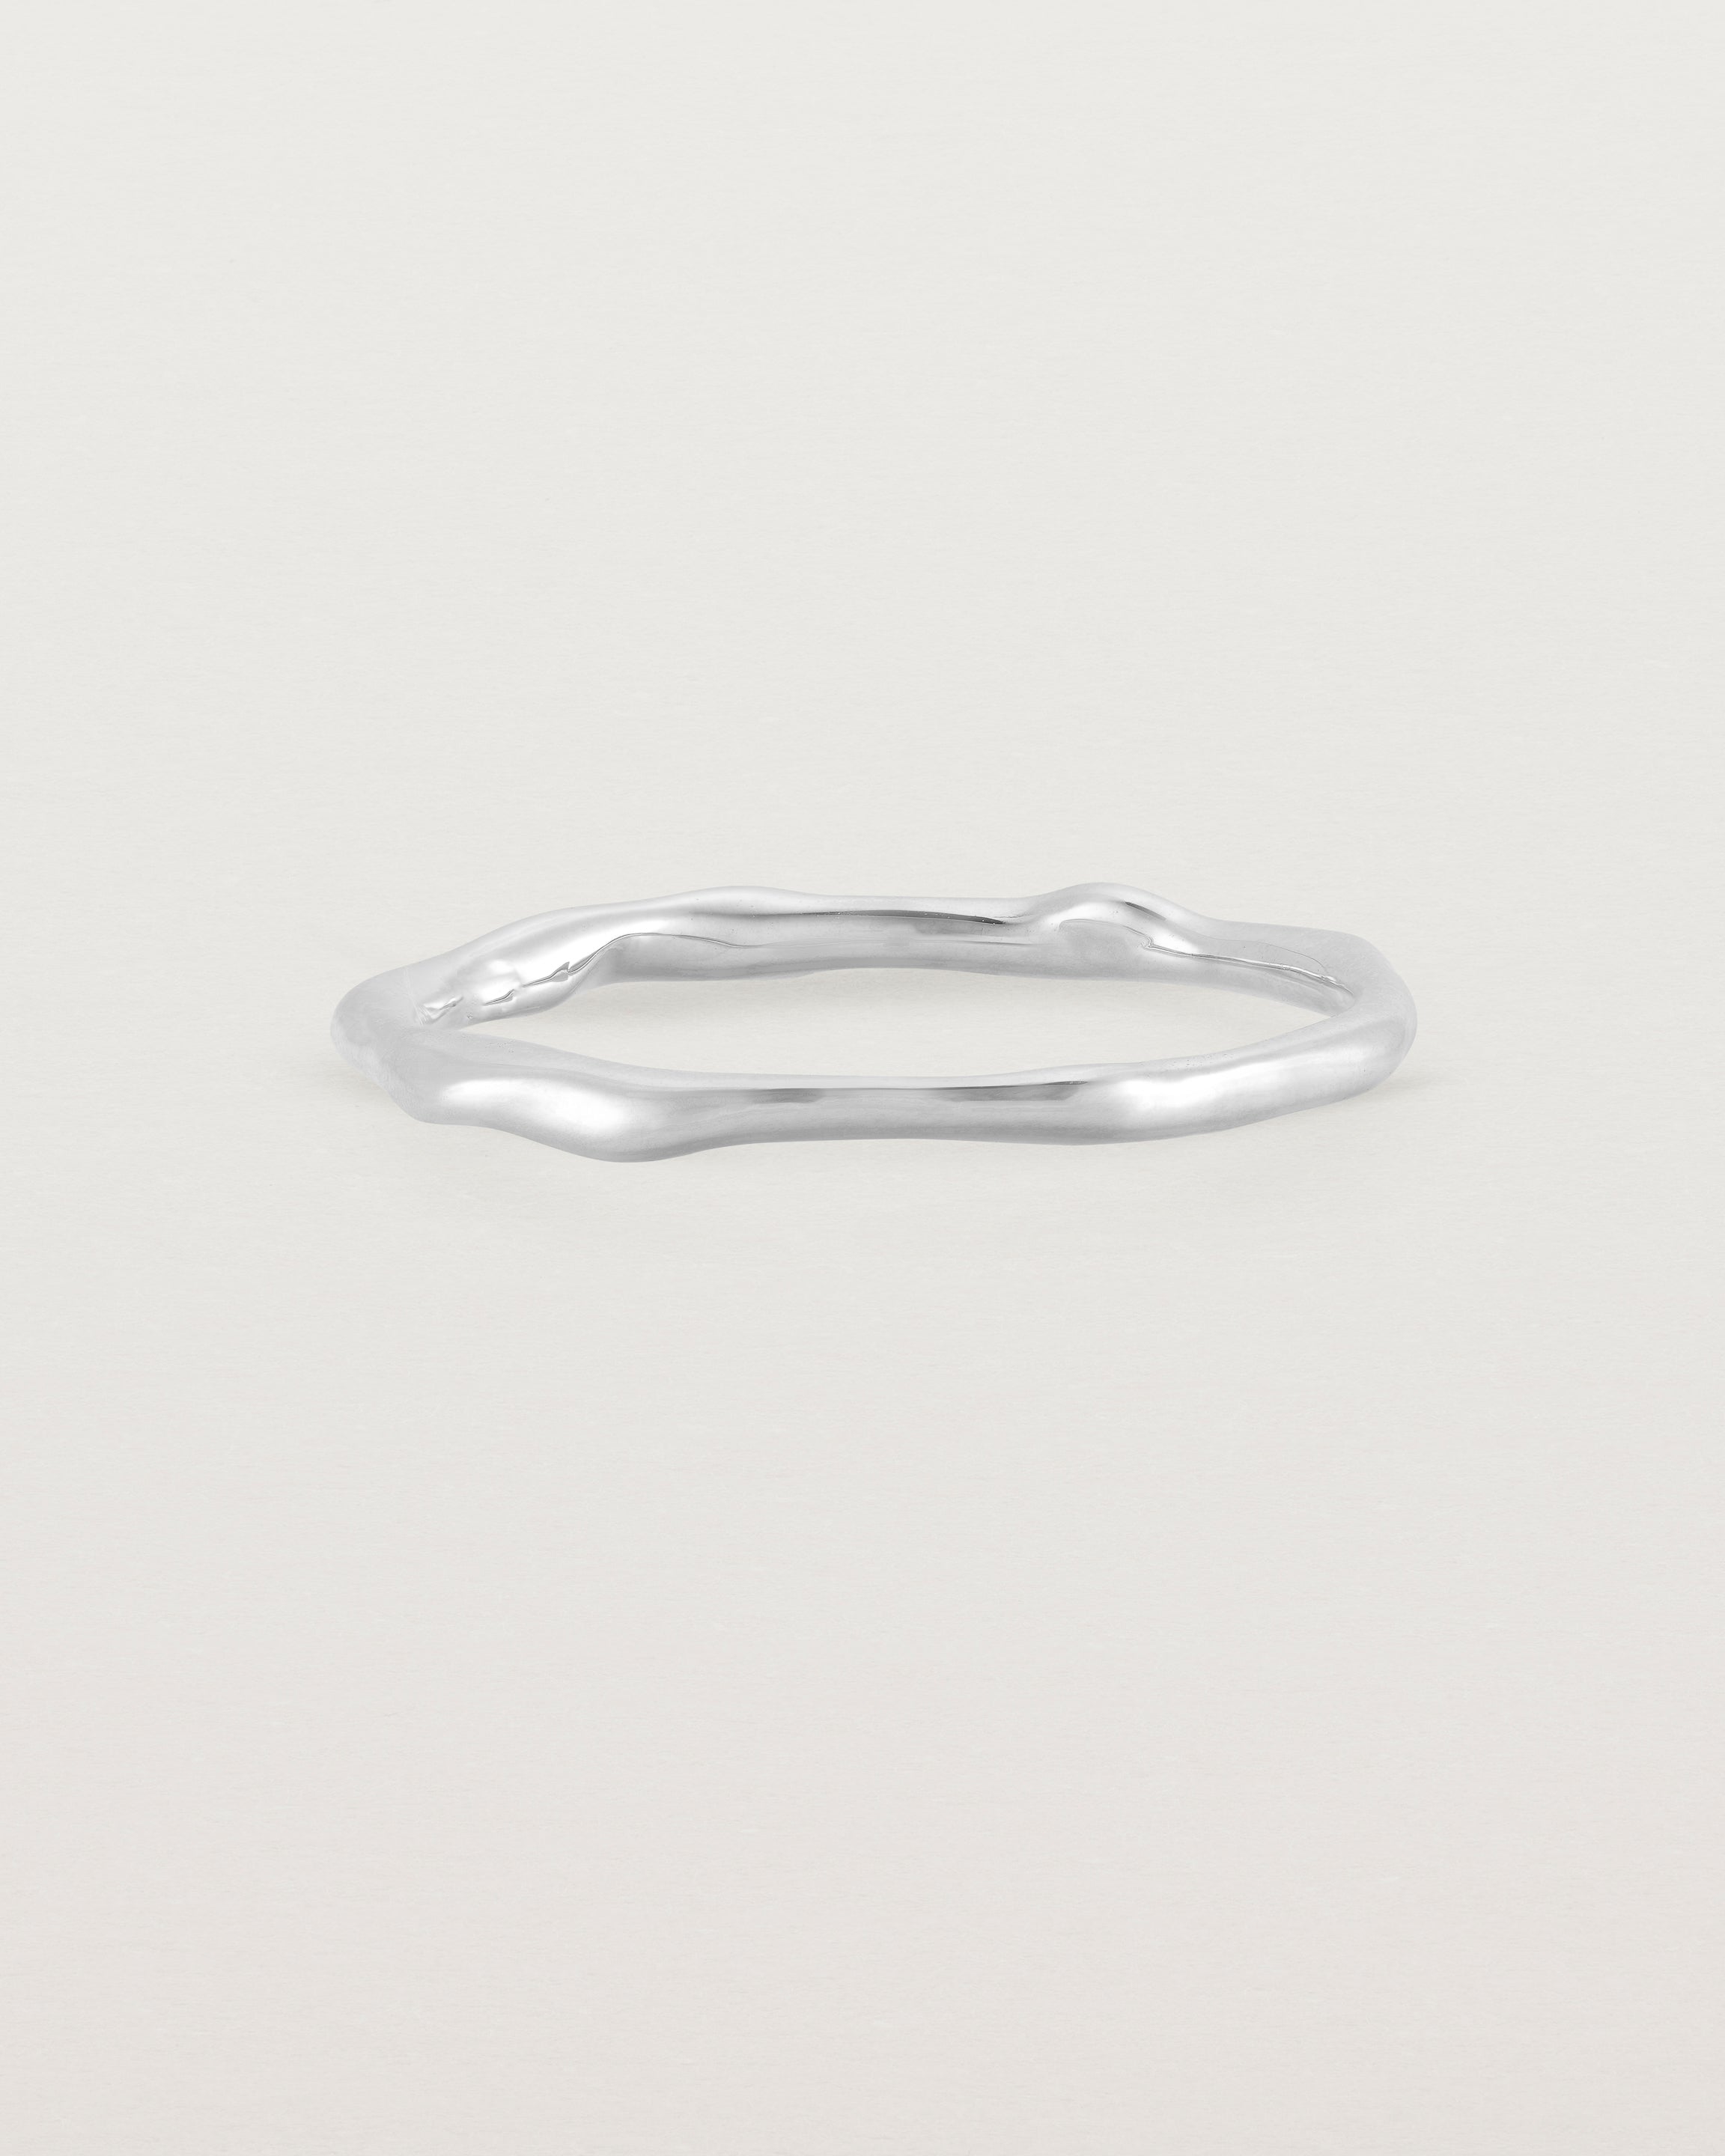 The Organic Stacking Ring in White Gold.